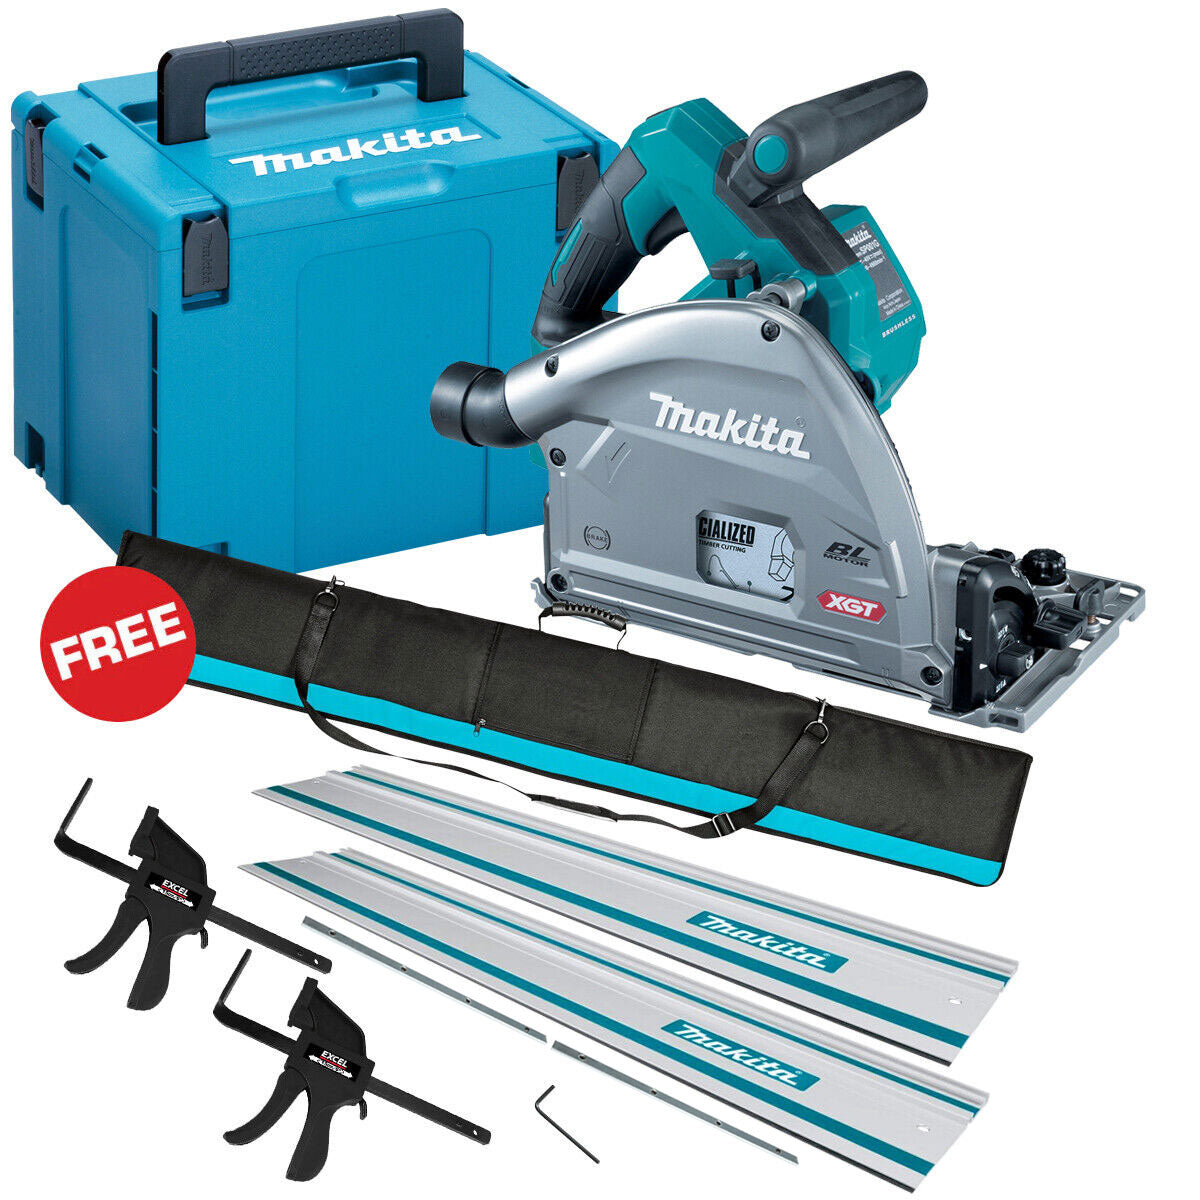 Makita SP001GZ03 40V Brushless Plunge Saw + 2 x Guide Rail Connector & Clamp Set